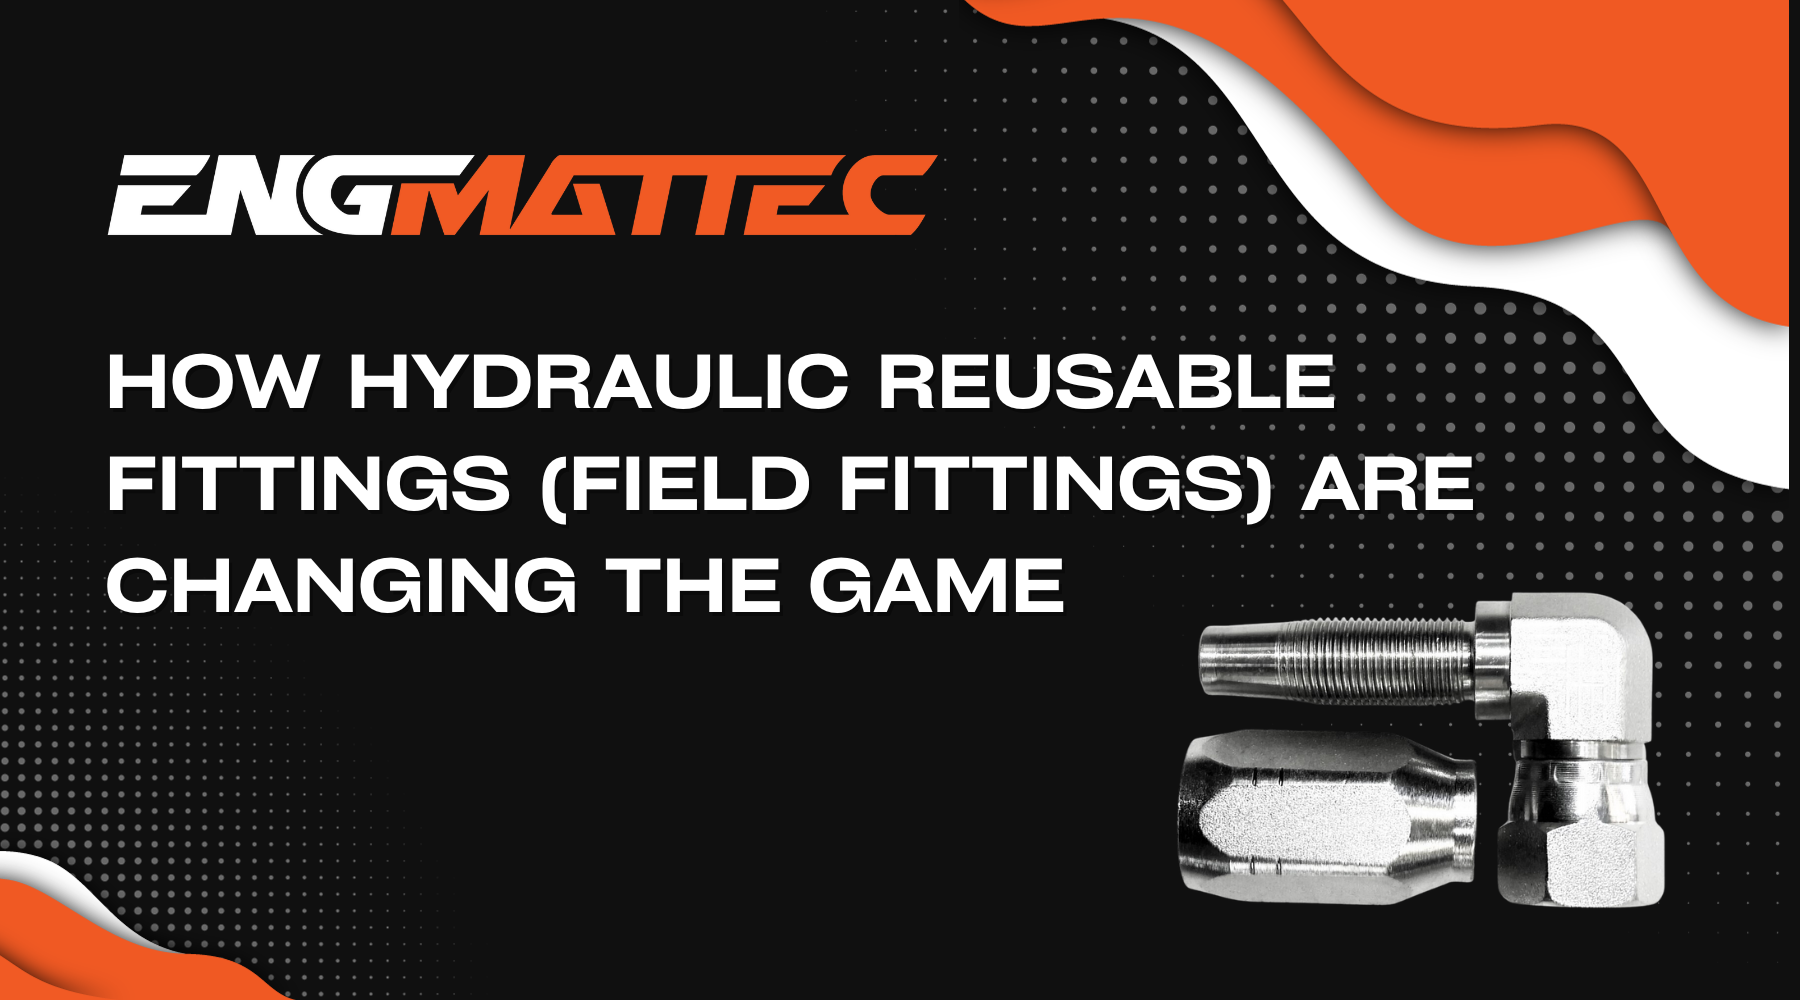 How Hydraulic Reusable Fittings (Field Fittings) are changing the game.